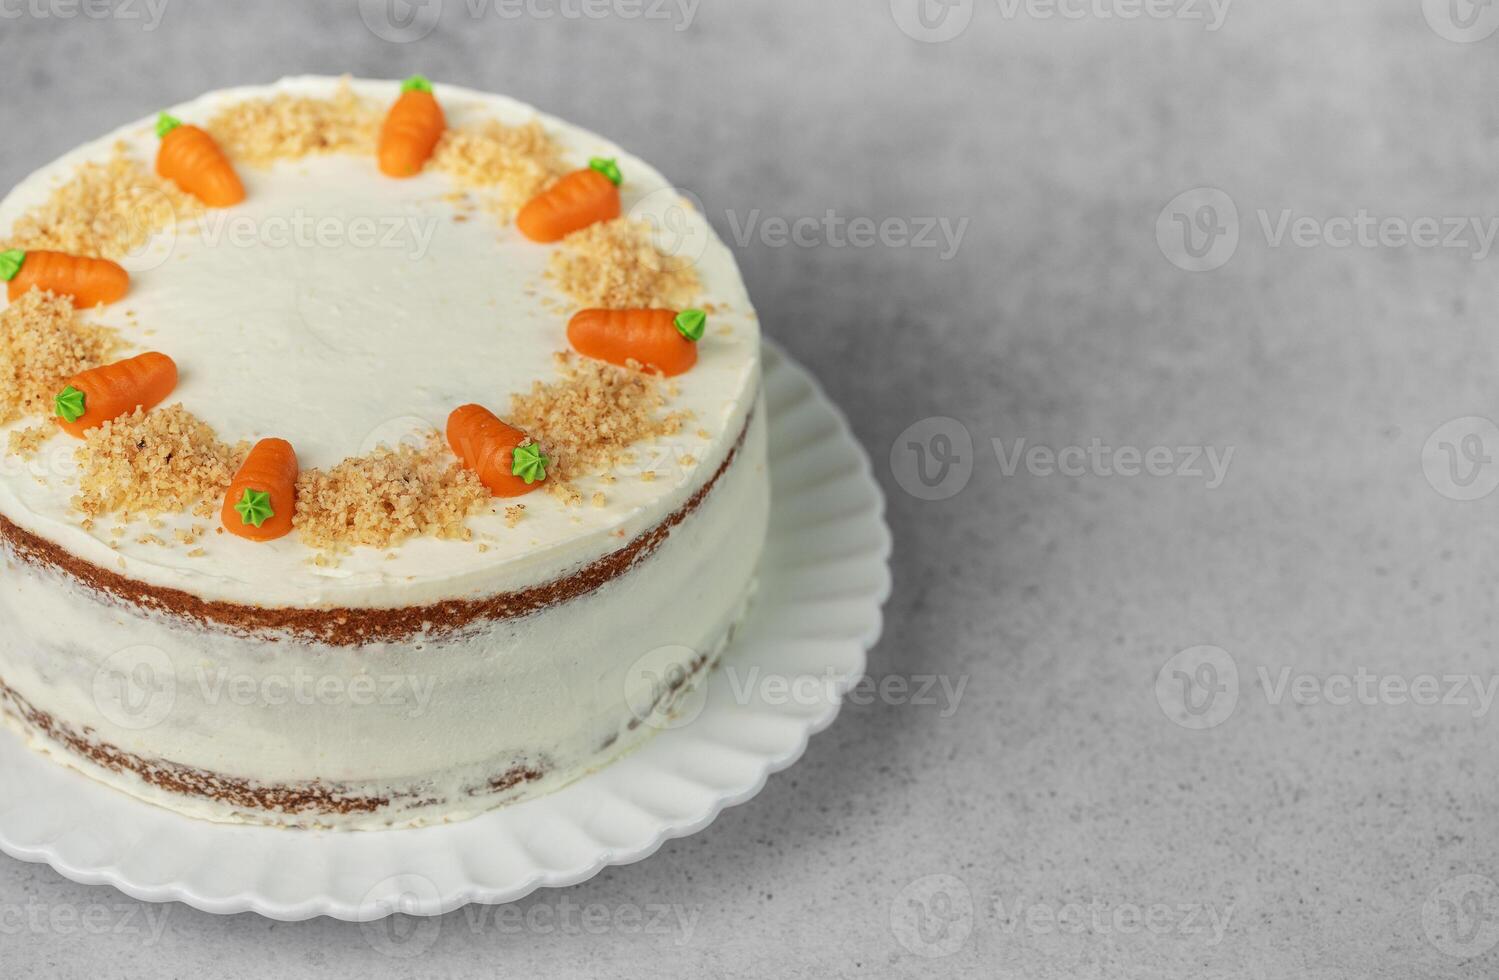 Homemade carrot cake made with walnuts, iced with cream cheese. Sweet dessert. photo